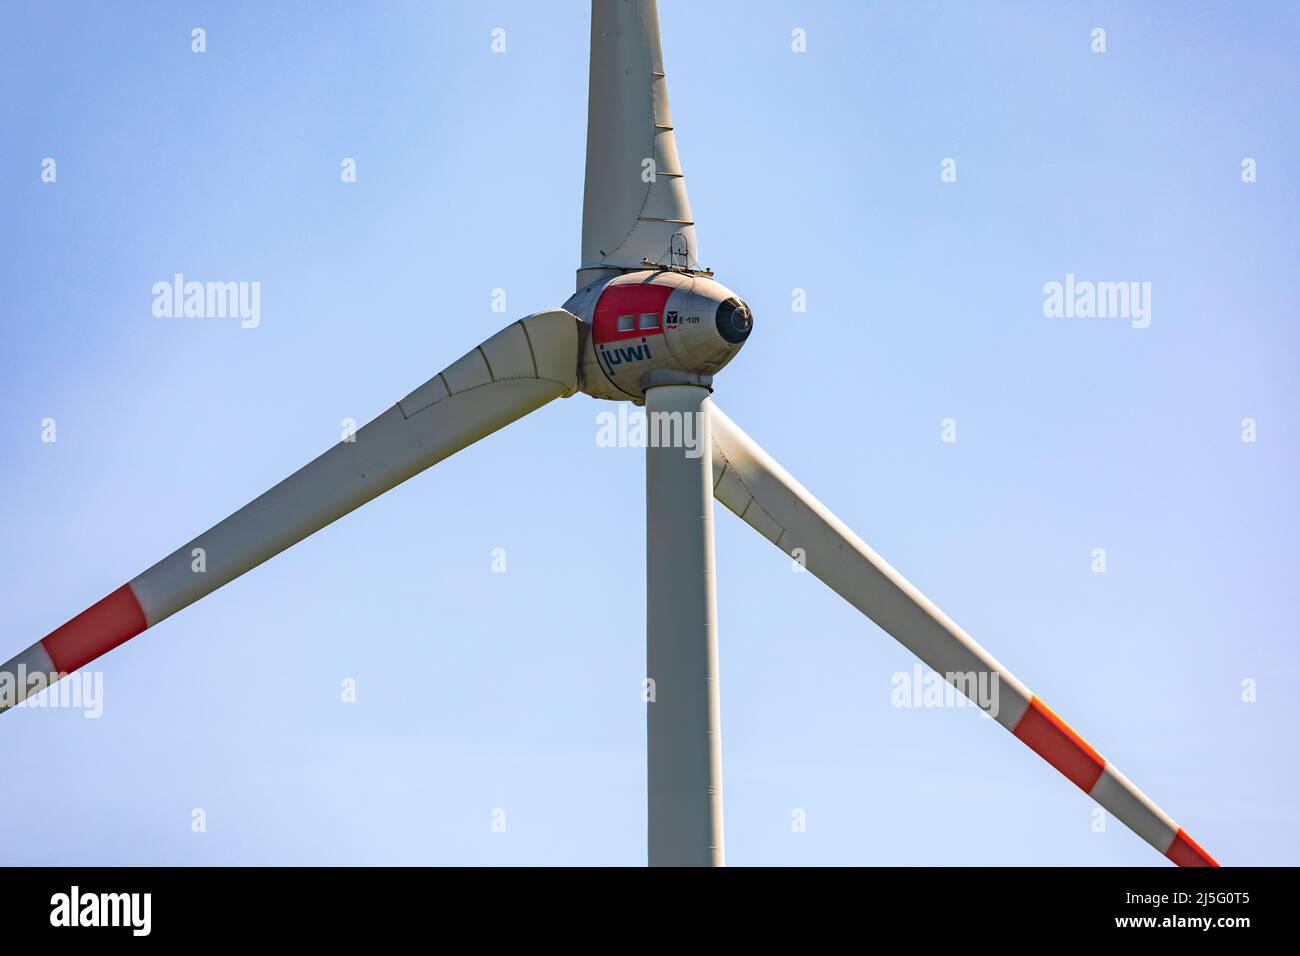 A close-up of a wind turbine with three huge rotor blades isolated against a blue sky Stock Photo